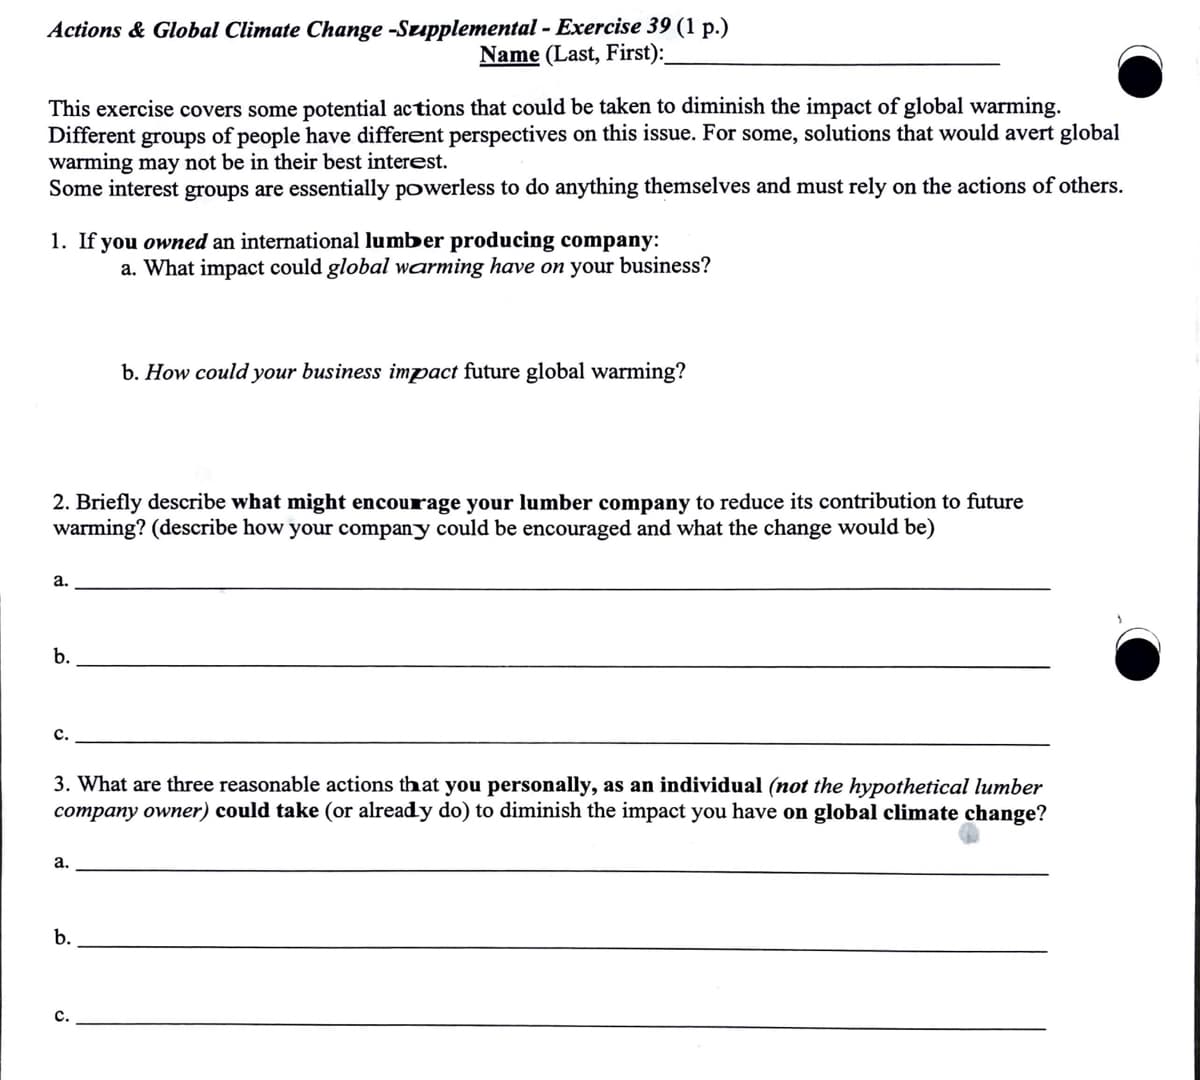 Actions & Global Climate Change -Supplemental - Exercise 39 (1 p.)
Name (Last, First):
This exercise covers some potential actions that could be taken to diminish the impact of global warming.
Different groups of people have different perspectives on this issue. For some, solutions that would avert global
warming may not be in their best interest.
Some interest groups are essentially powerless to do anything themselves and must rely on the actions of others.
1. If you owned an international lumber producing company:
a. What impact could global warming have on your business?
b. How could your business impact future global warming?
2. Briefly describe what might encourage your lumber company to reduce its contribution to future
warming? (describe how your company could be encouraged and what the change would be)
a.
b.
C.
3. What are three reasonable actions that you personally, as an individual (not the hypothetical lumber
company owner) could take (or already do) to diminish the impact you have on global climate change?
a.
b.
c.